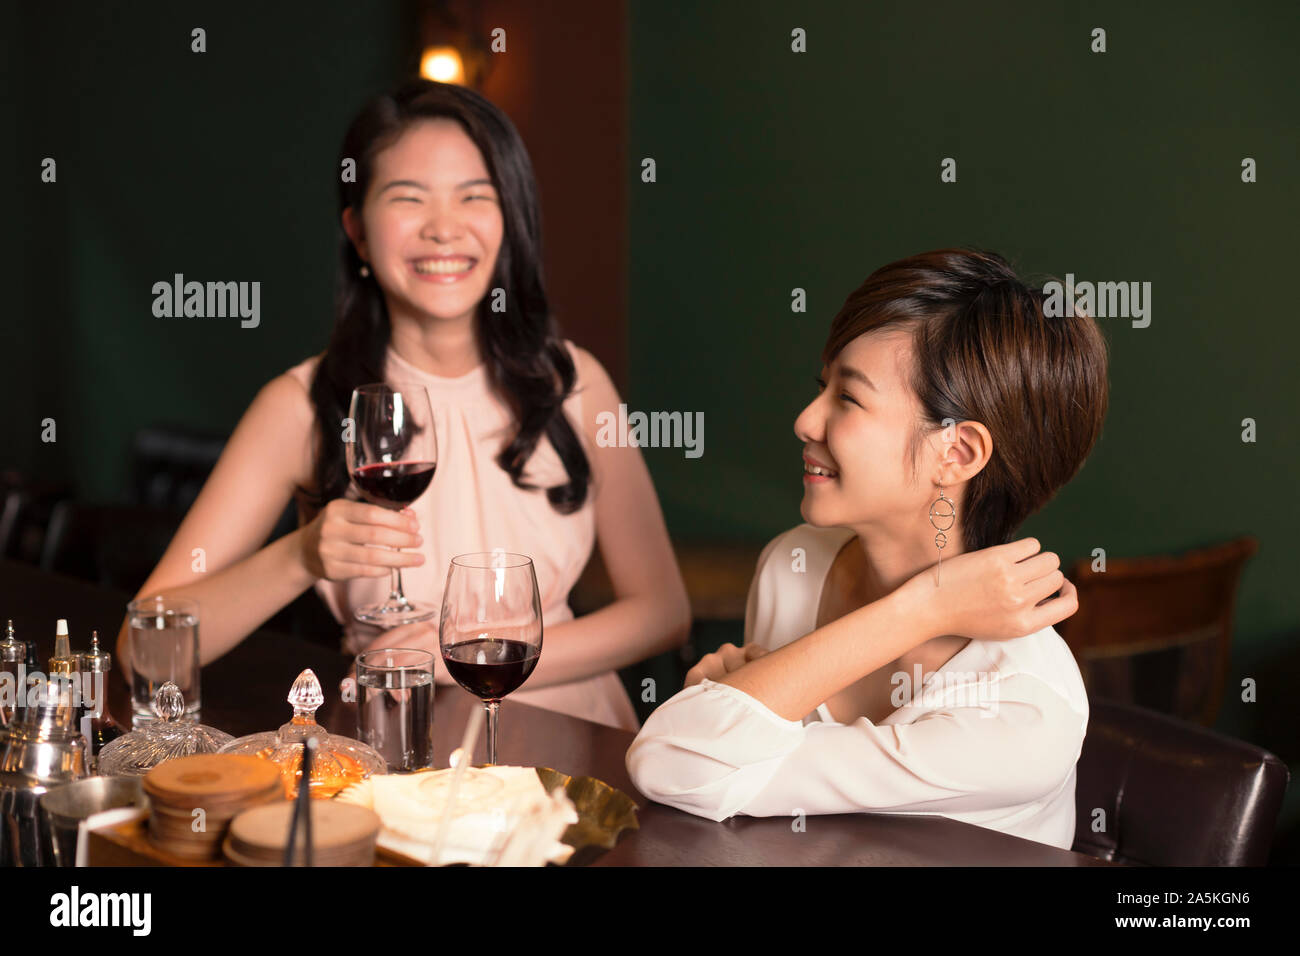 Two women having wine while sitting at bar counter in bar Stock Photo